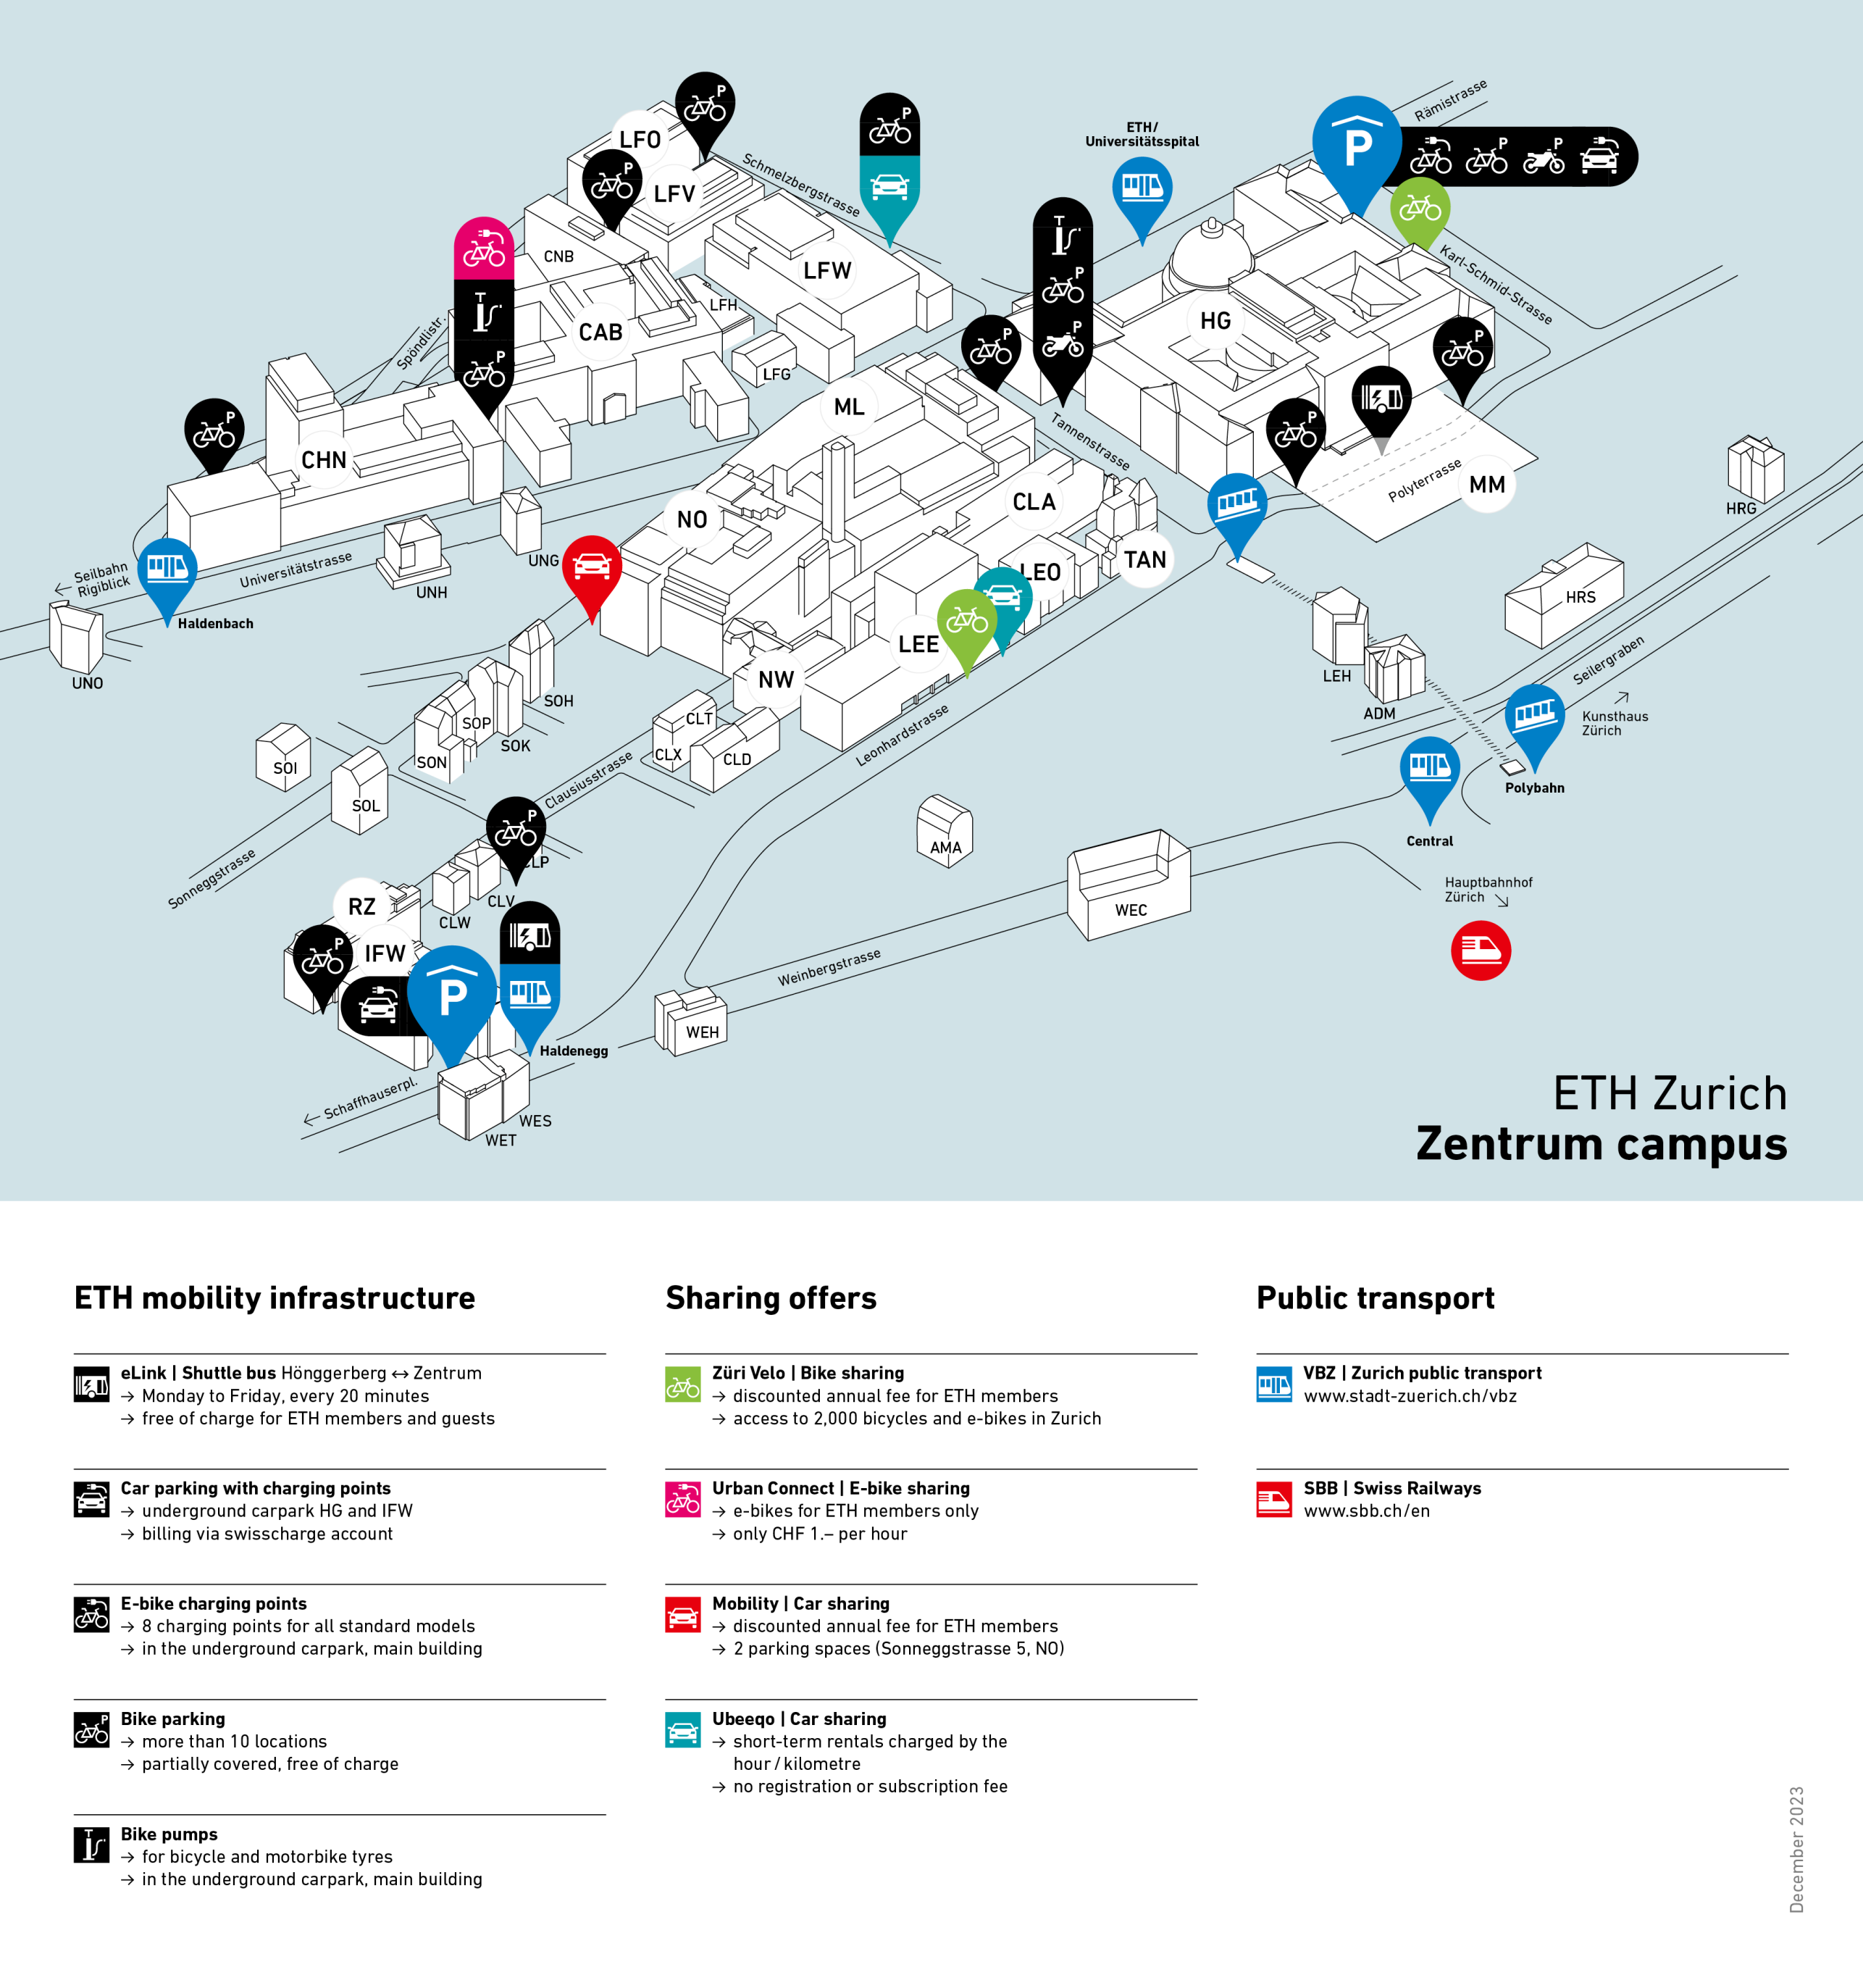 Enlarged view: Locations of ETH mobility services on the Centre Campus